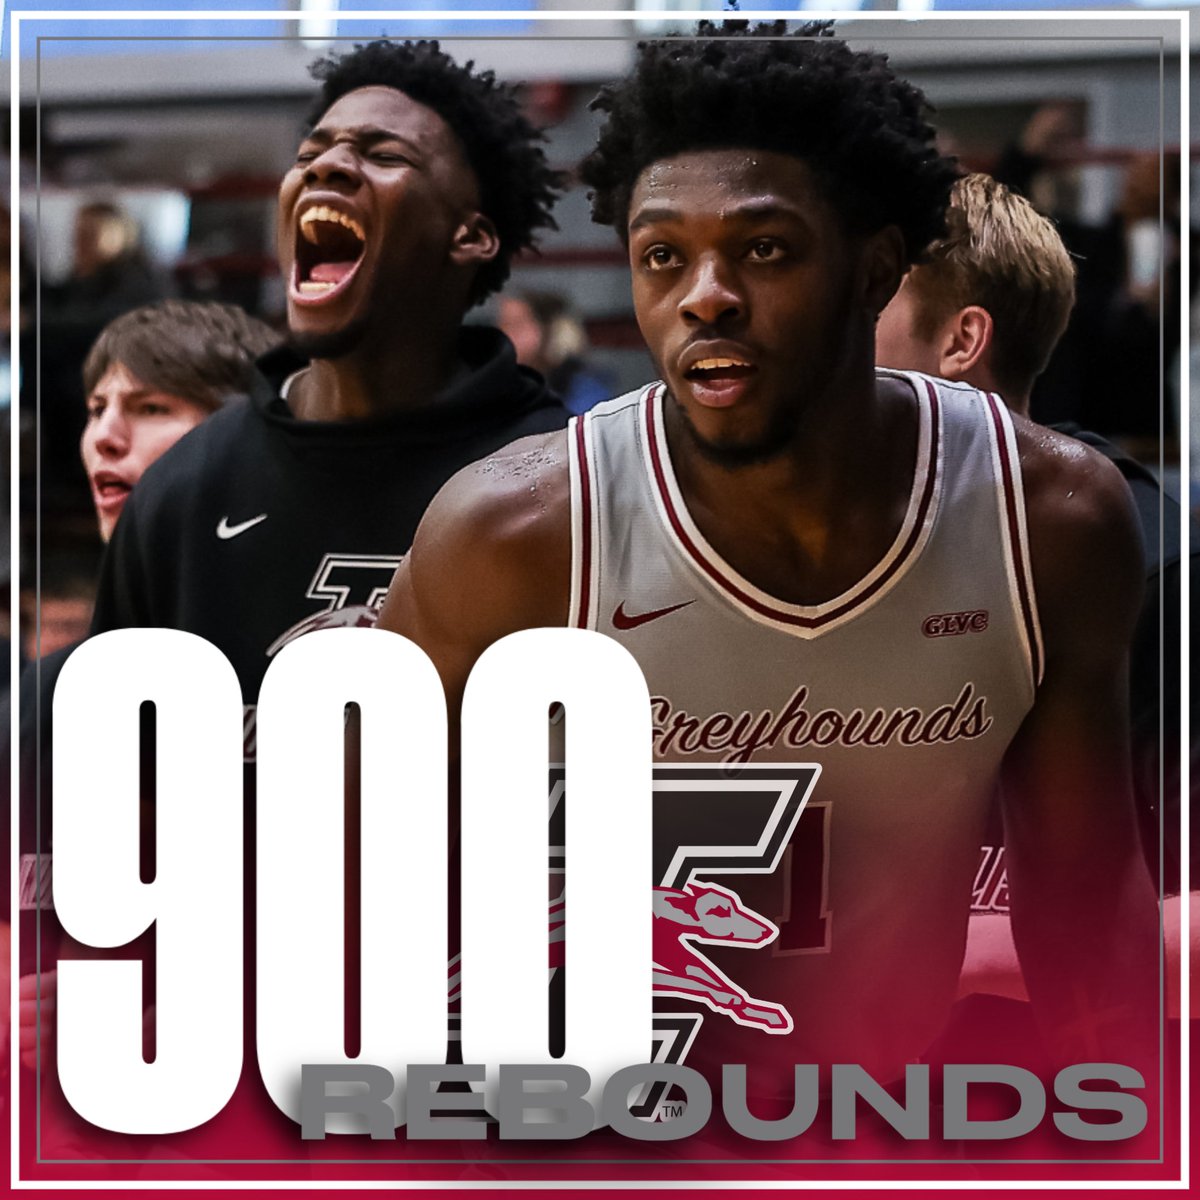 During the first half, Kendrick Tchoua just the fifth Greyhound EVER to reach 900 career rebounds! 👏👏👏